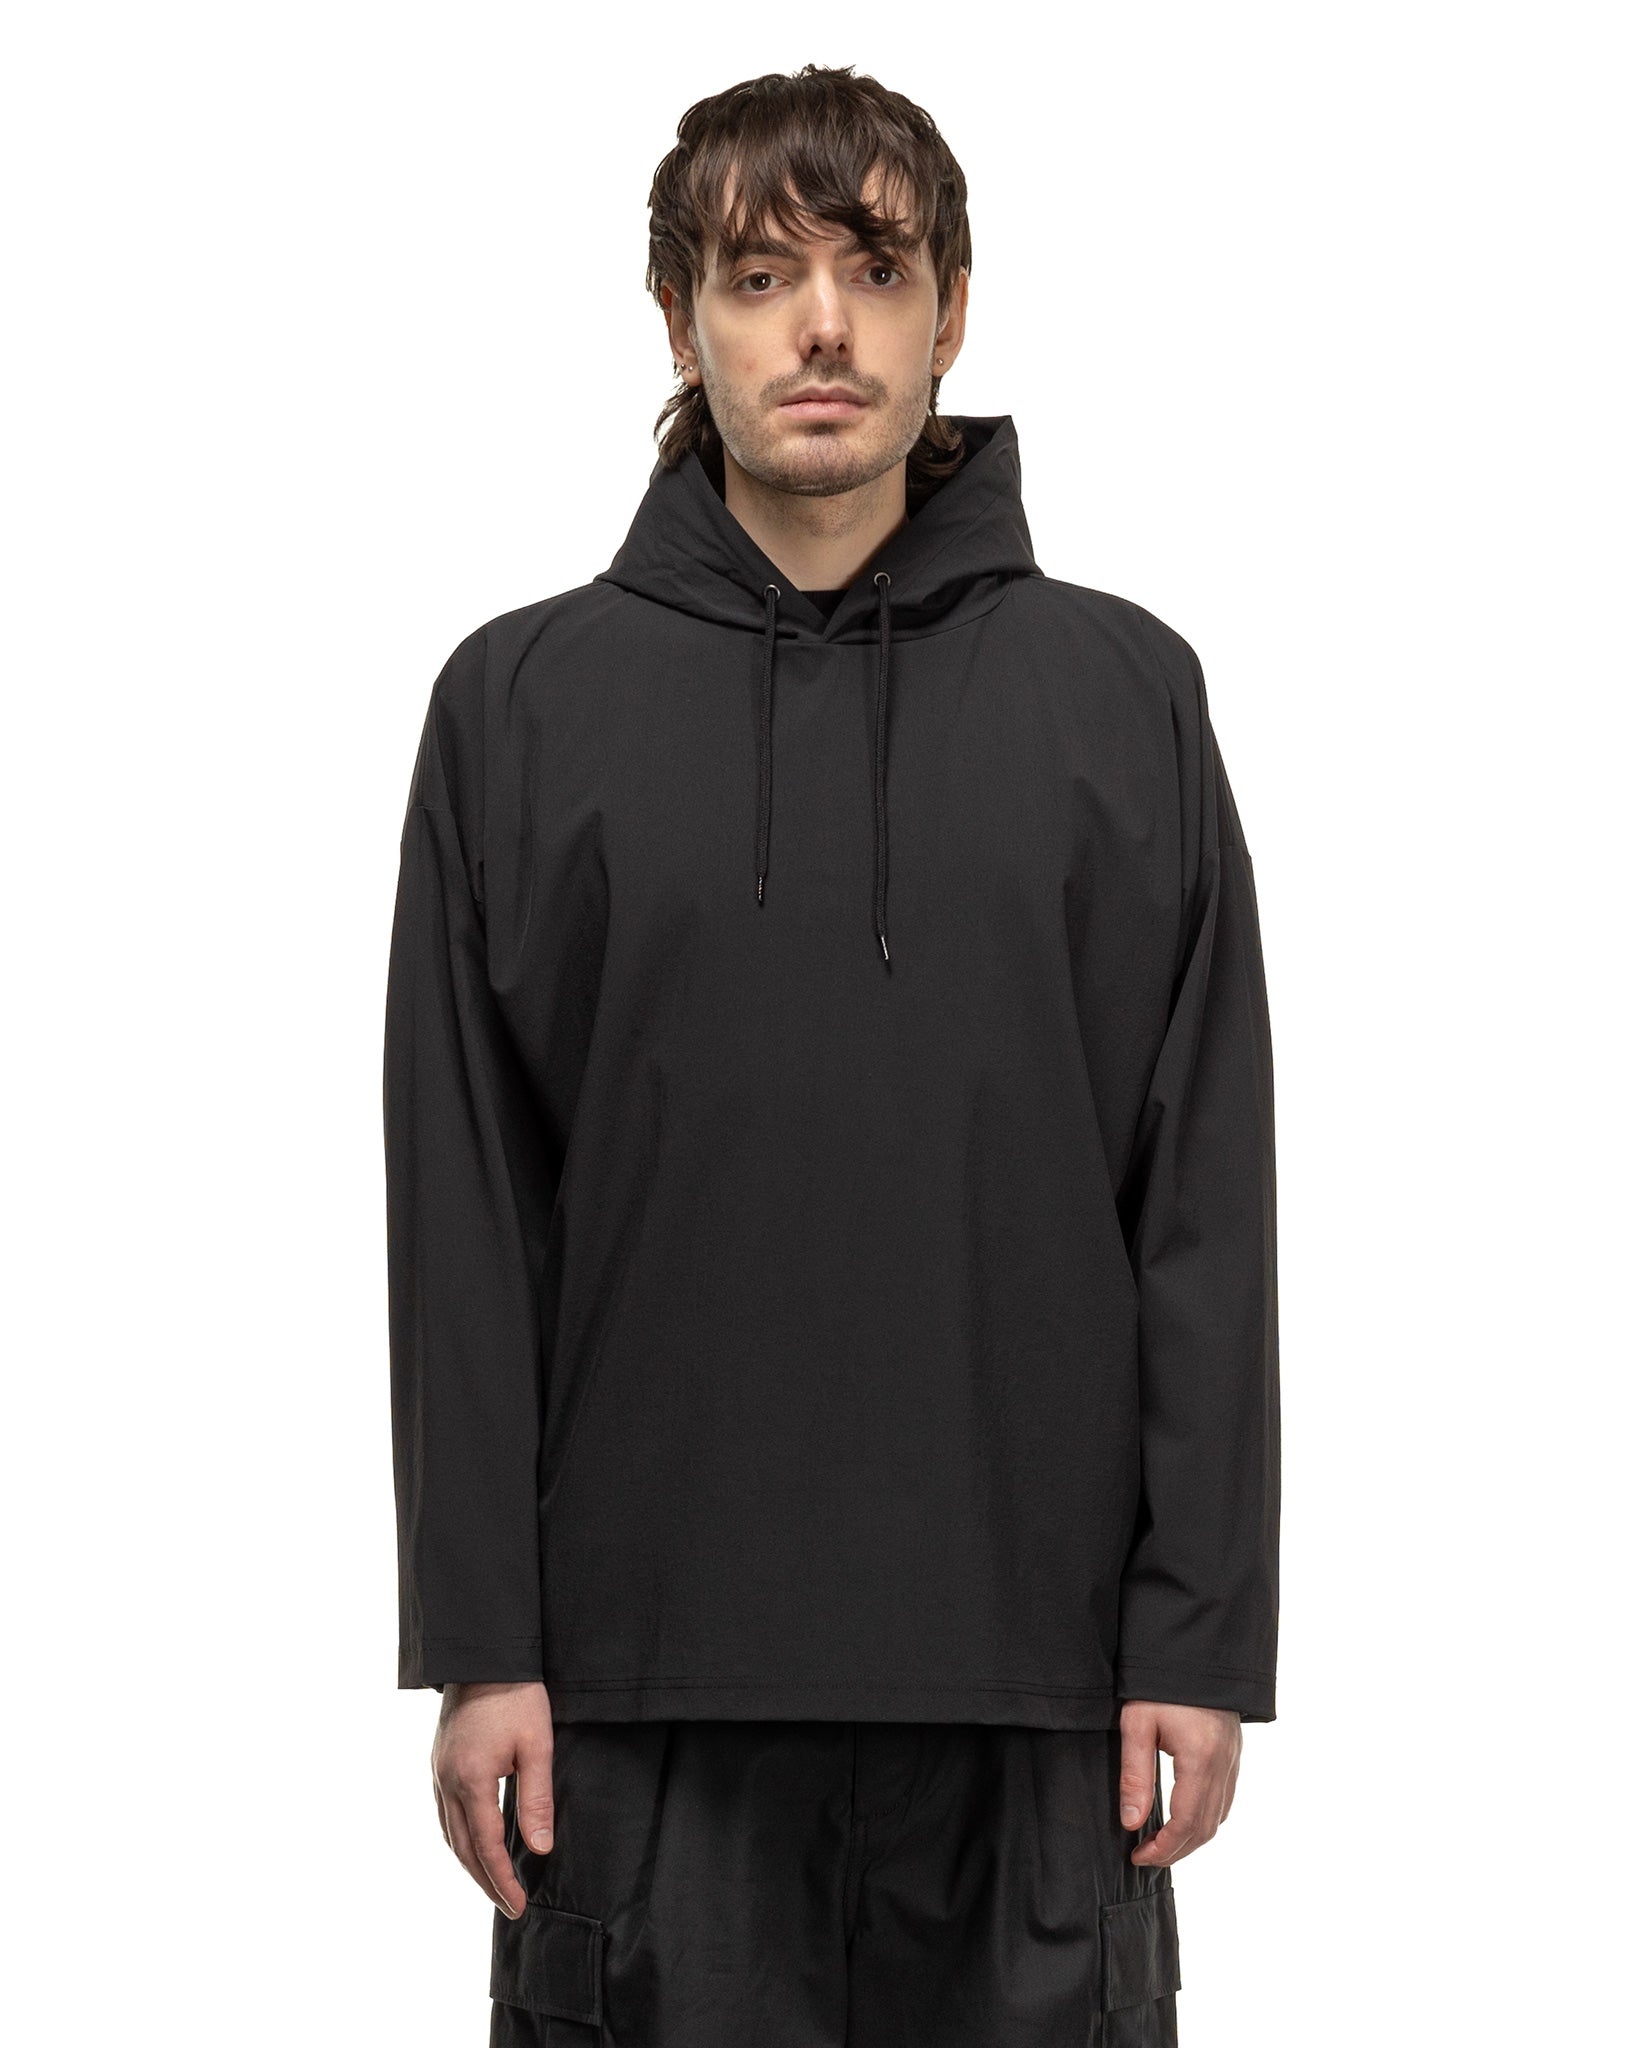 4Way Stretch Oversized Pullover Hoodie Black - 3